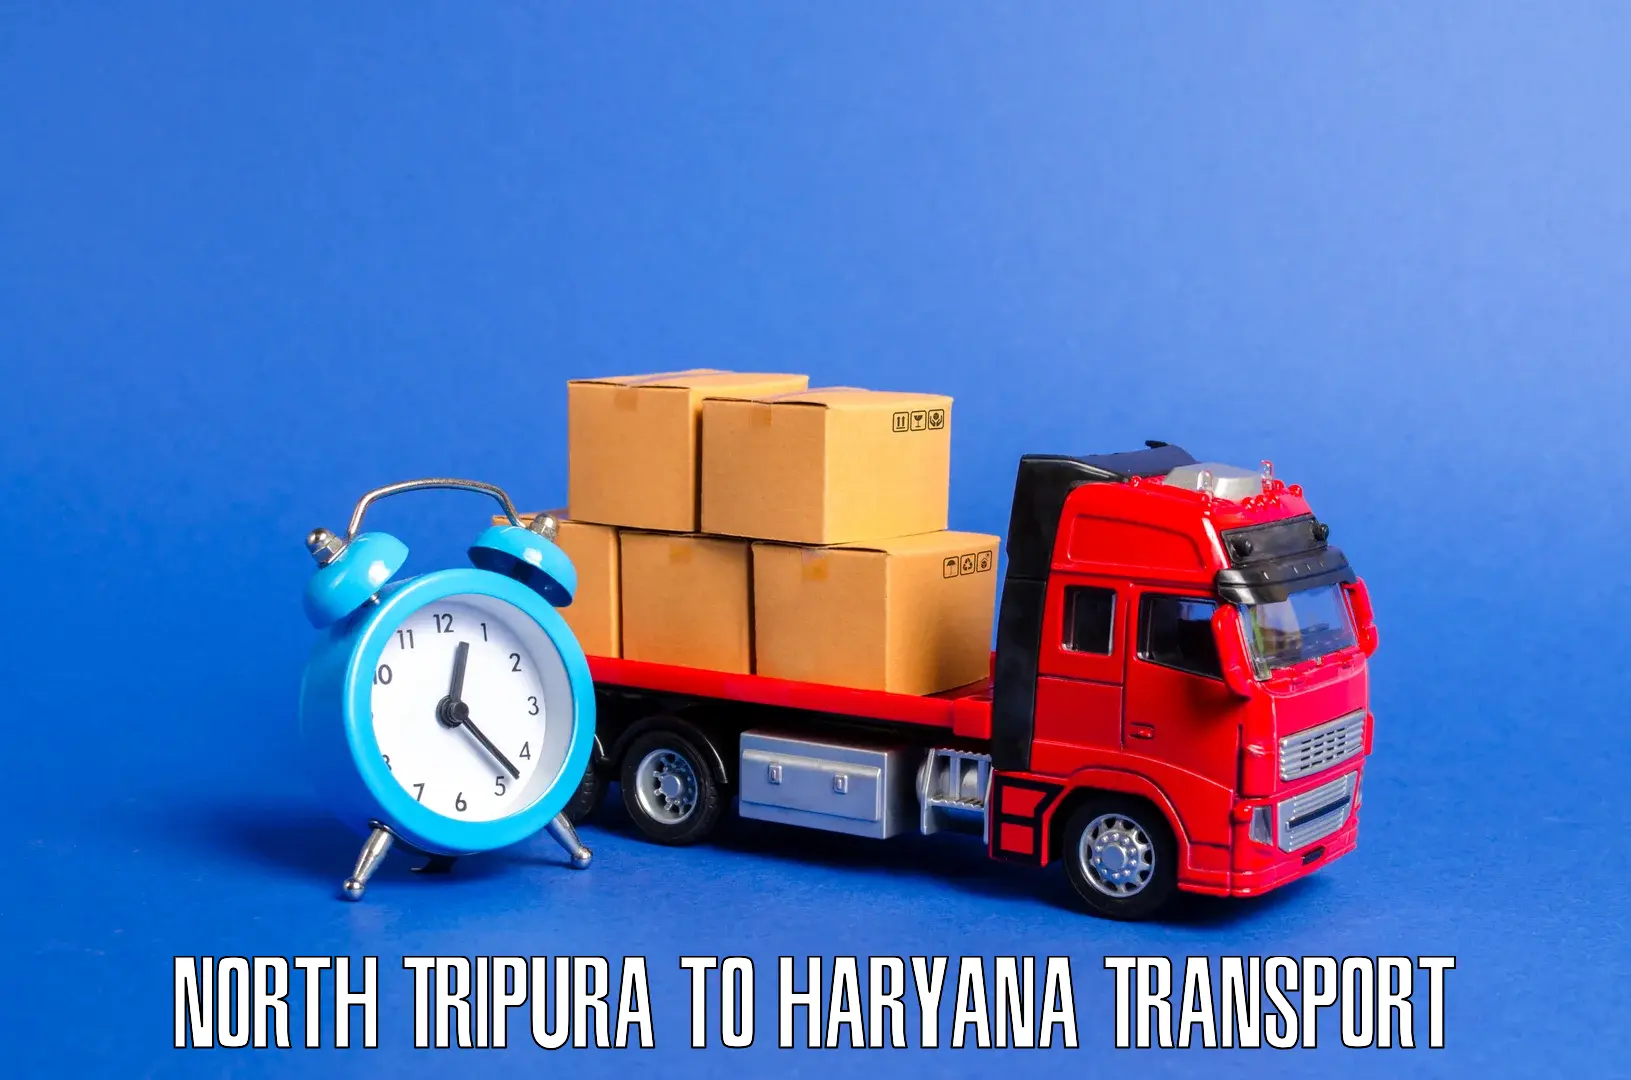 Container transport service North Tripura to Sohna